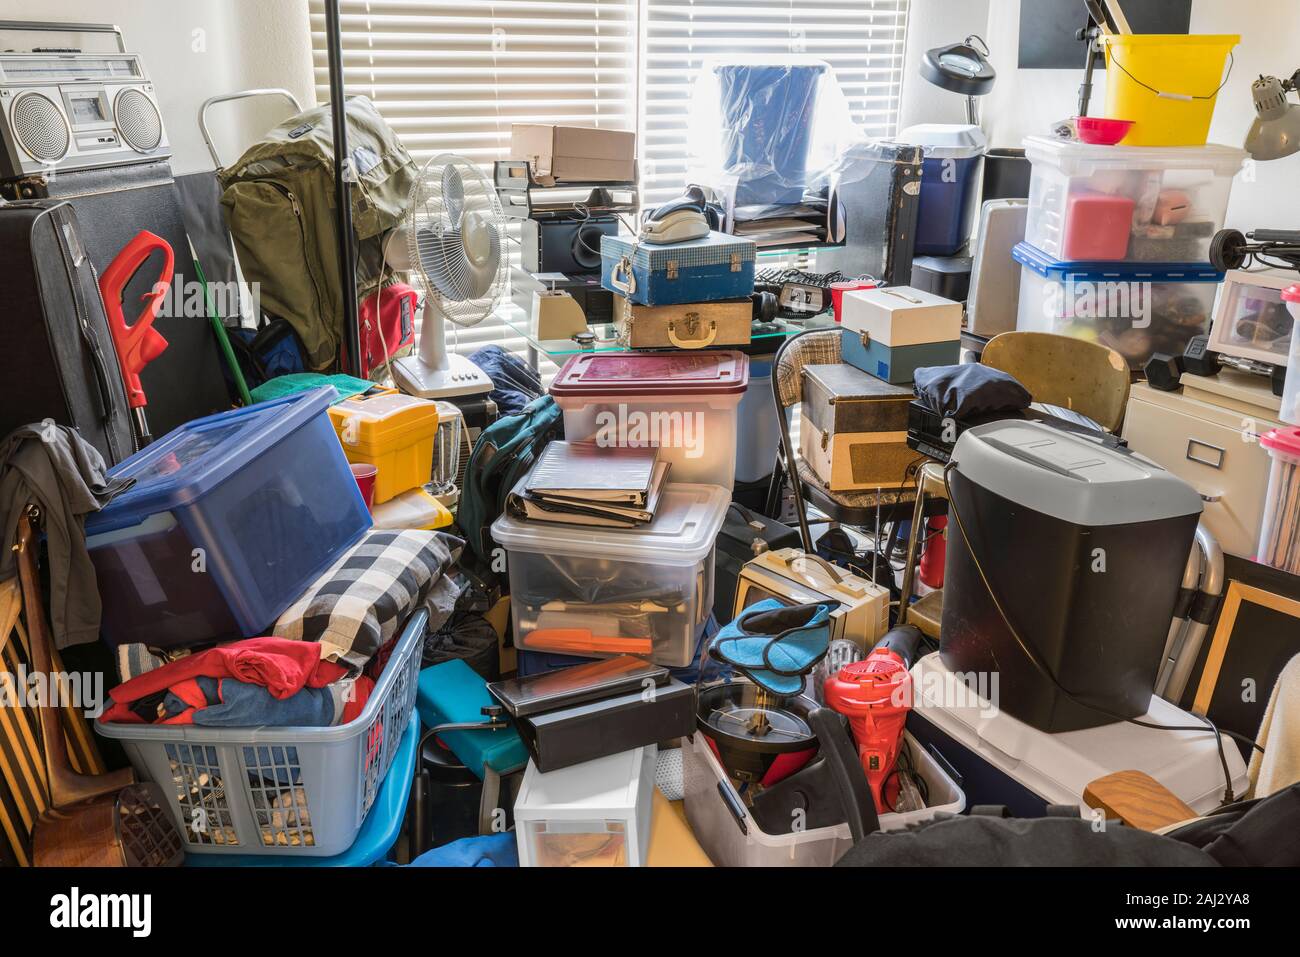 Hoarder room packed with boxes, electronics, business equipment, household objects and miscellaneous junk. Stock Photo